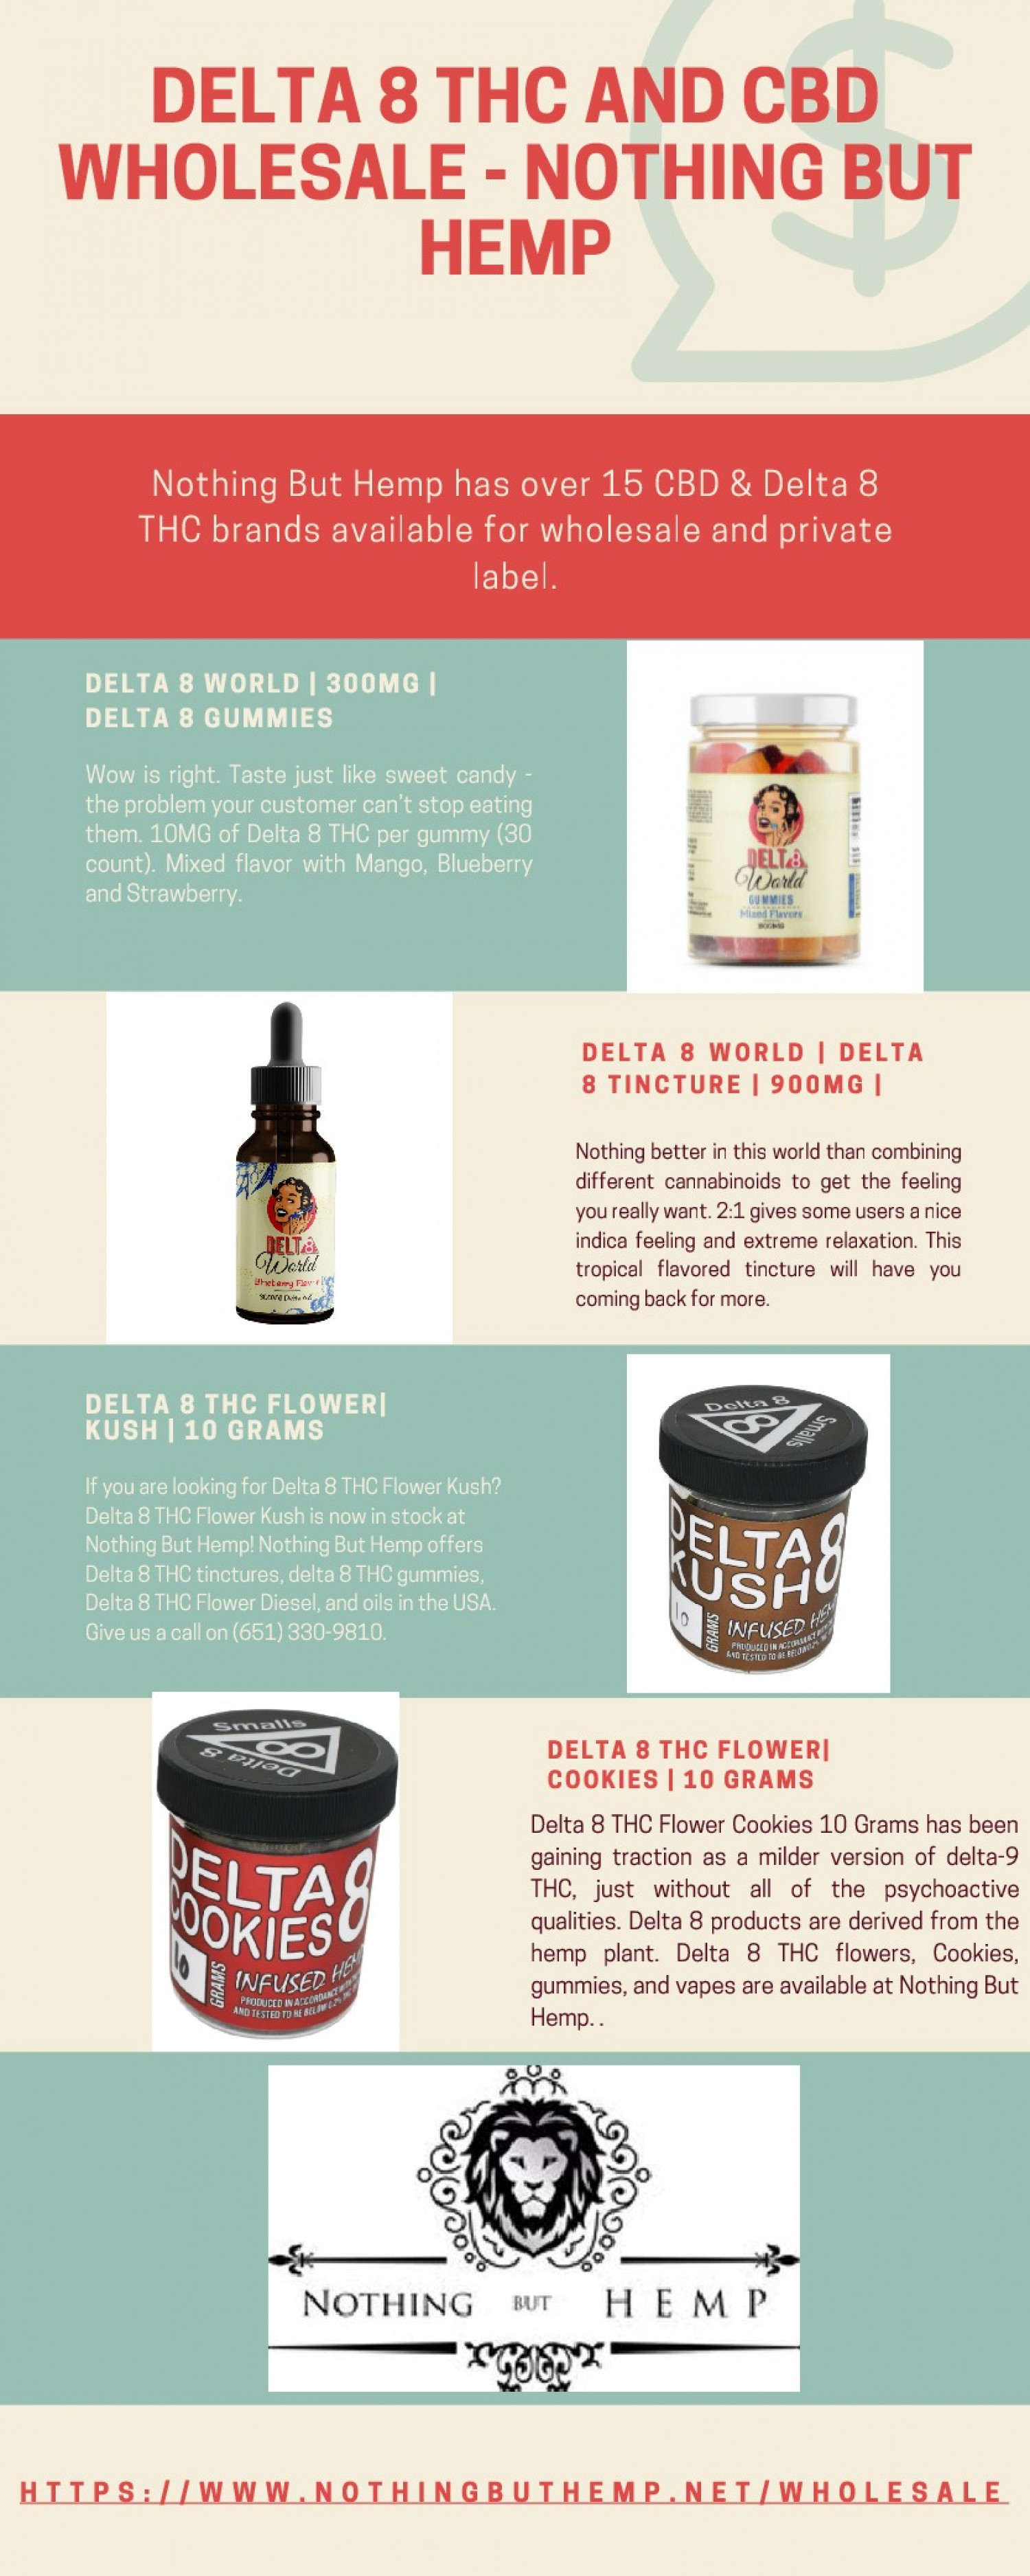 Buy CBD and Delta 8 Products wholesale Infographic